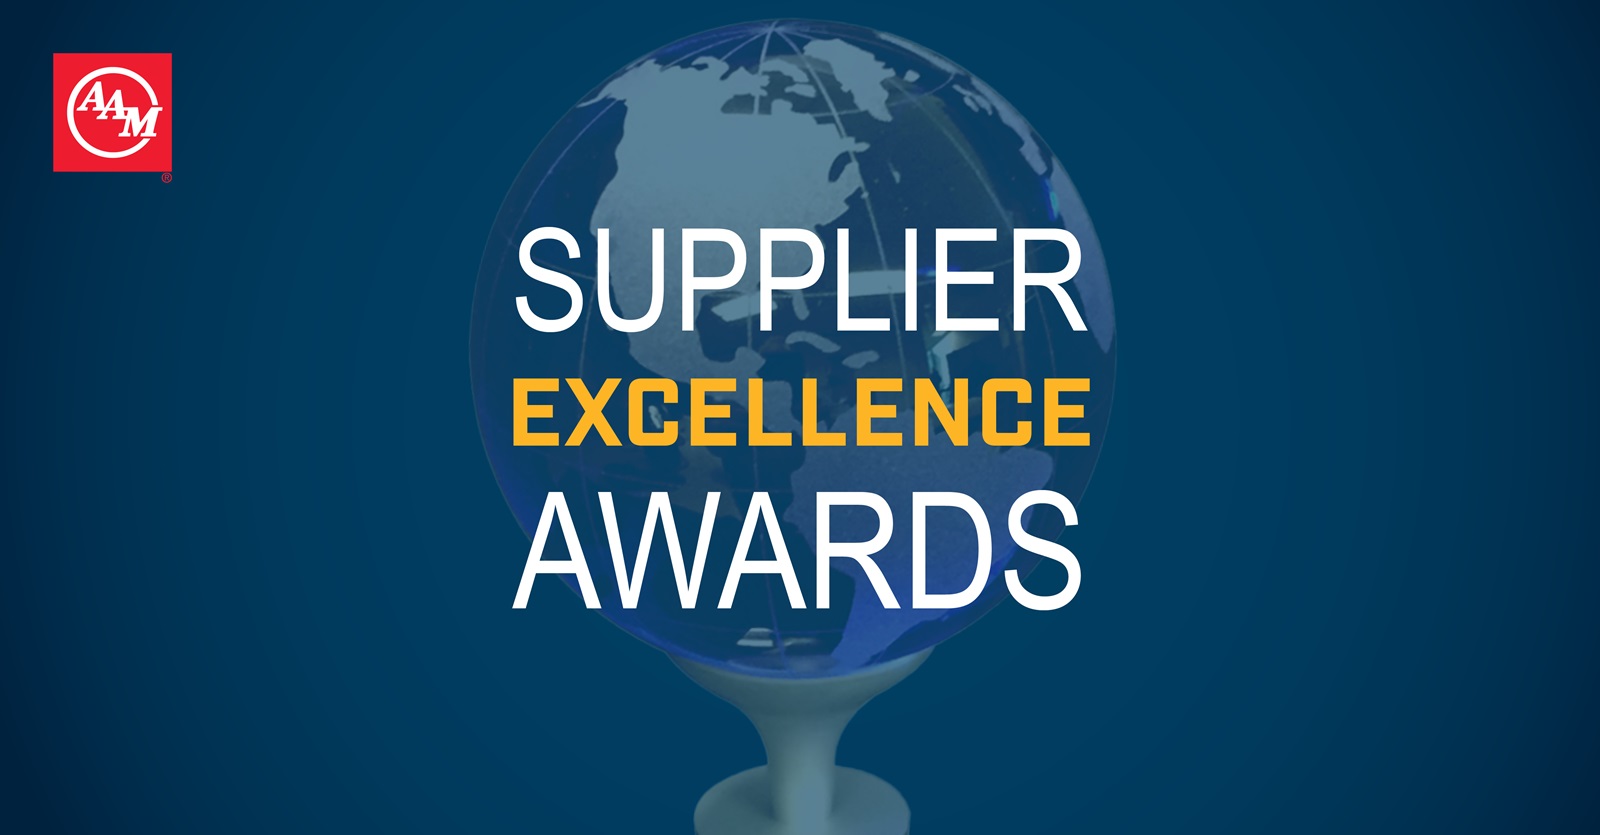 Supplier_Excellence_Awards_Updated_Graphic (003)